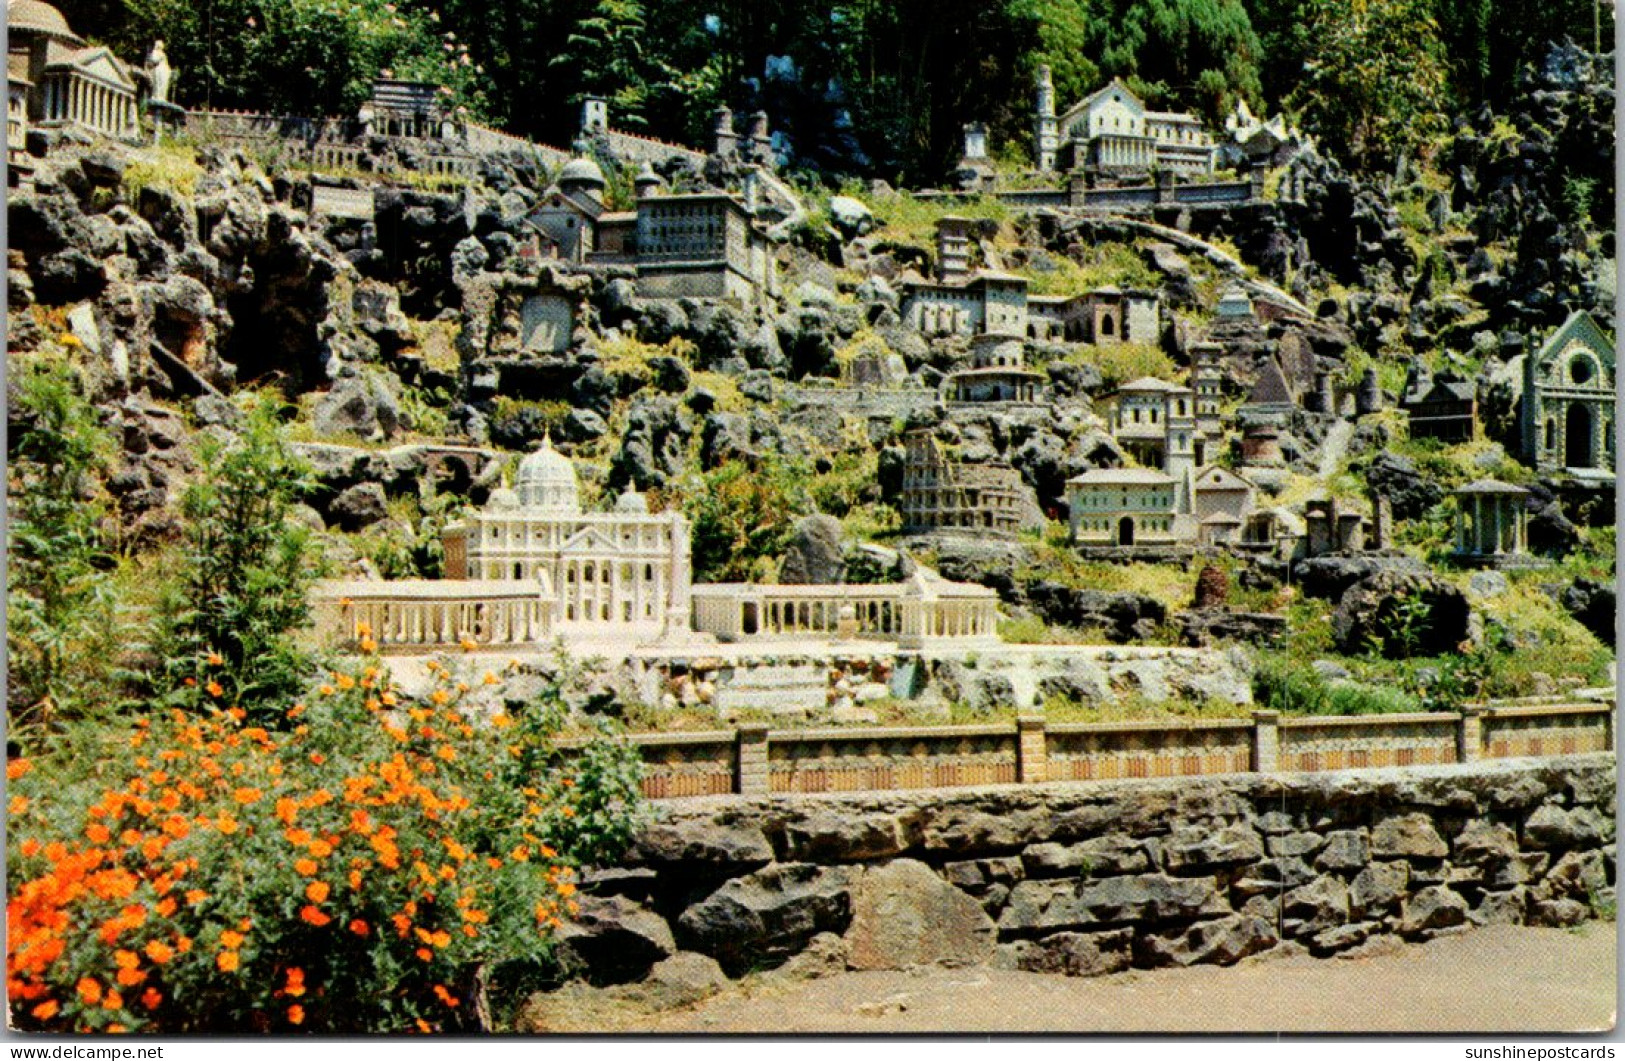 Alabama Cullman Ave Maria Grotto Italian Miniature Section - Other & Unclassified